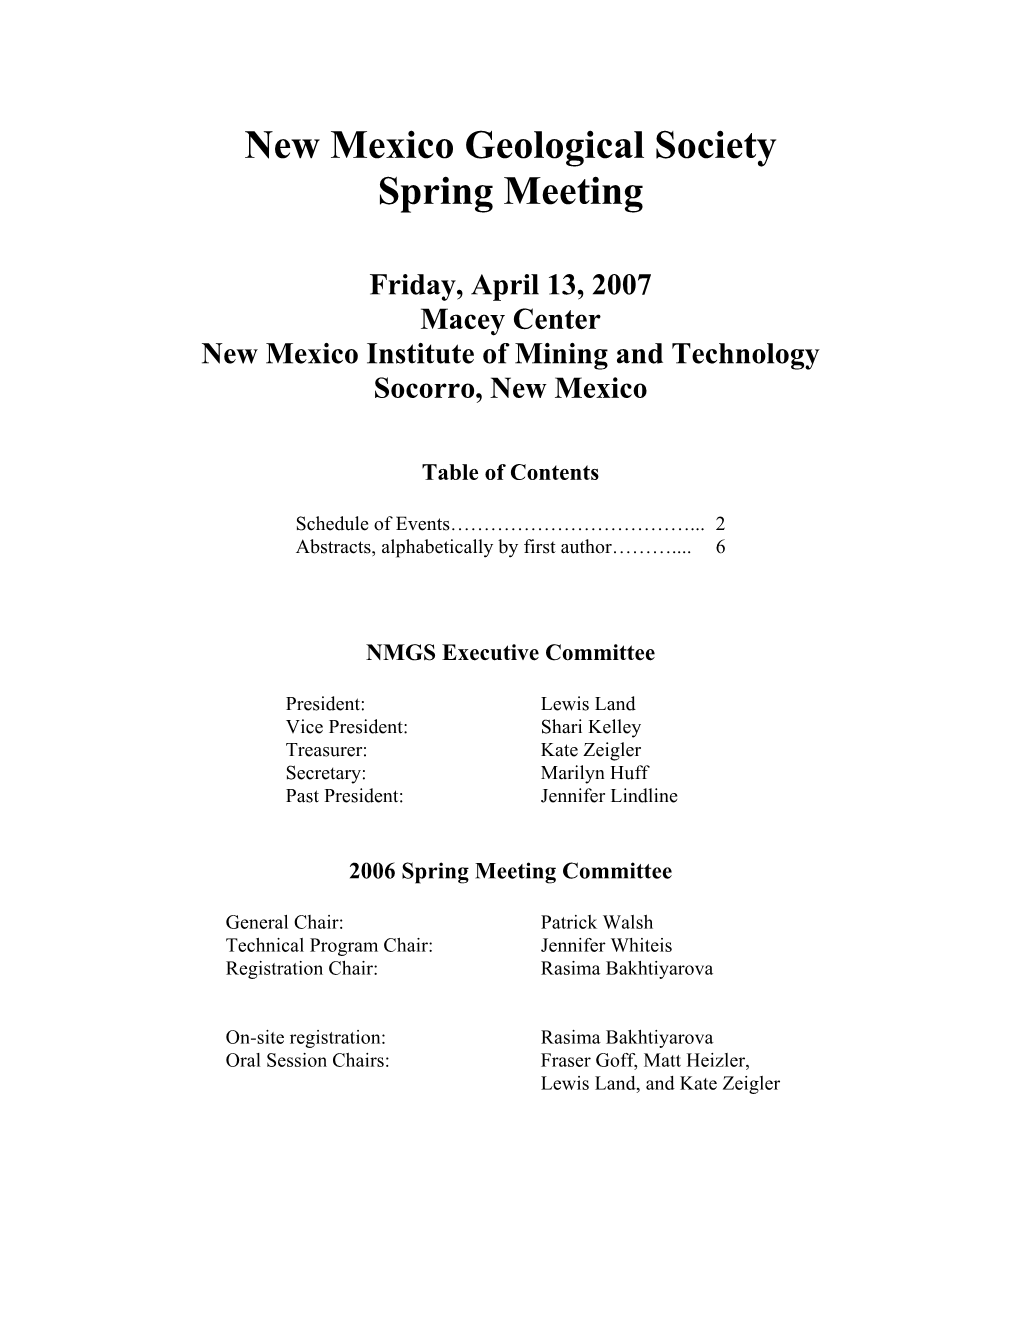 New Mexico Geological Society Spring Meeting